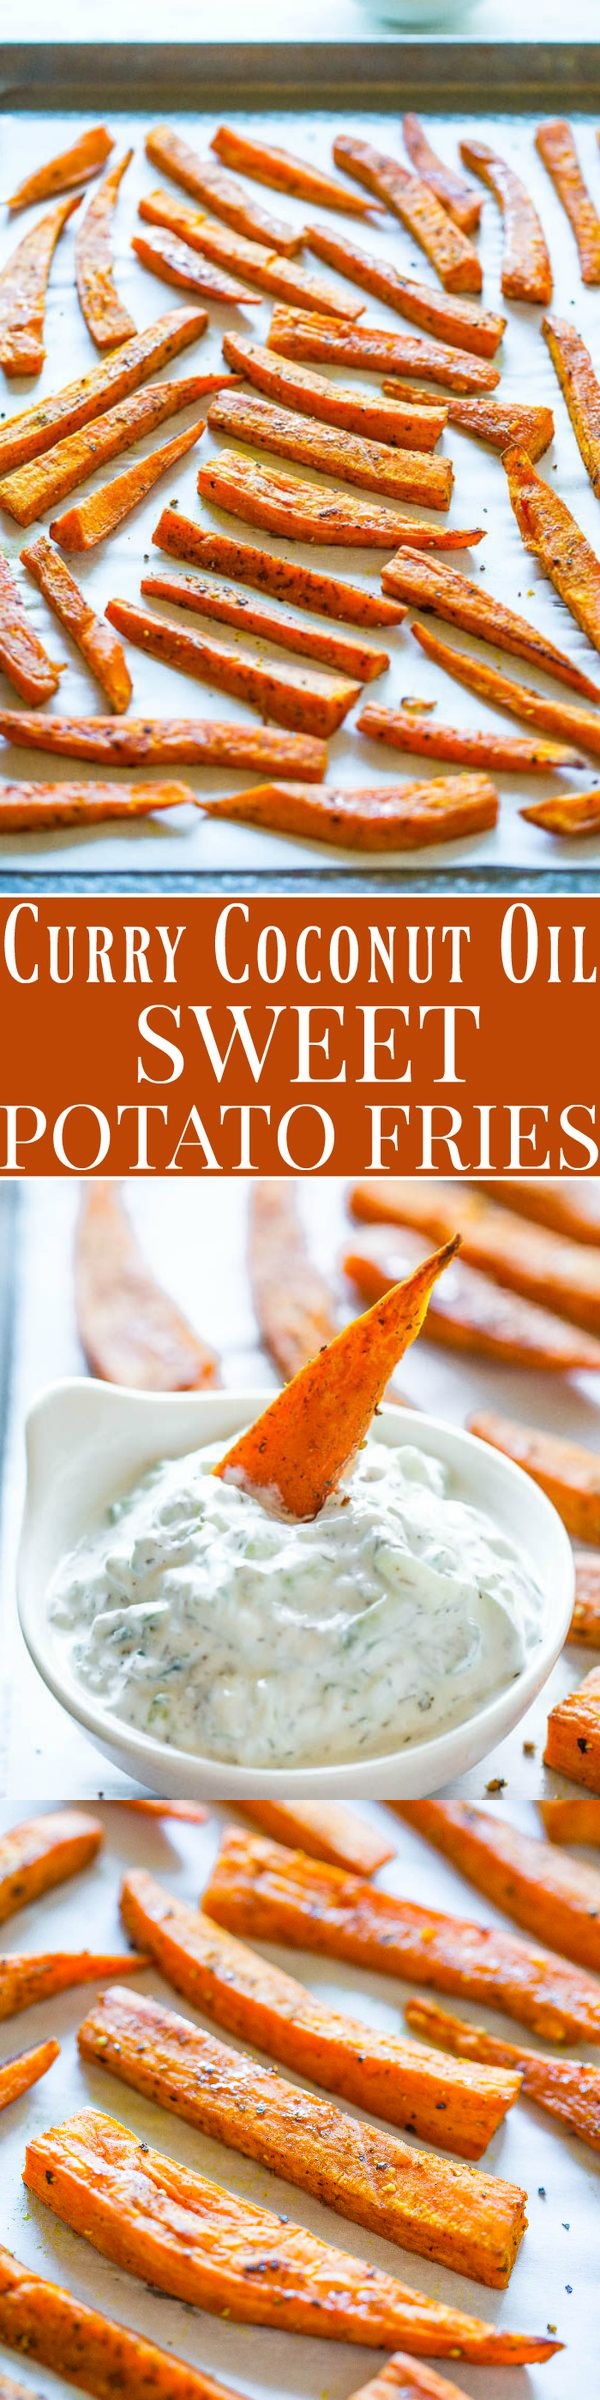 Curry Coconut Oil Sweet Potato Fries with Cucumber Dill Dip